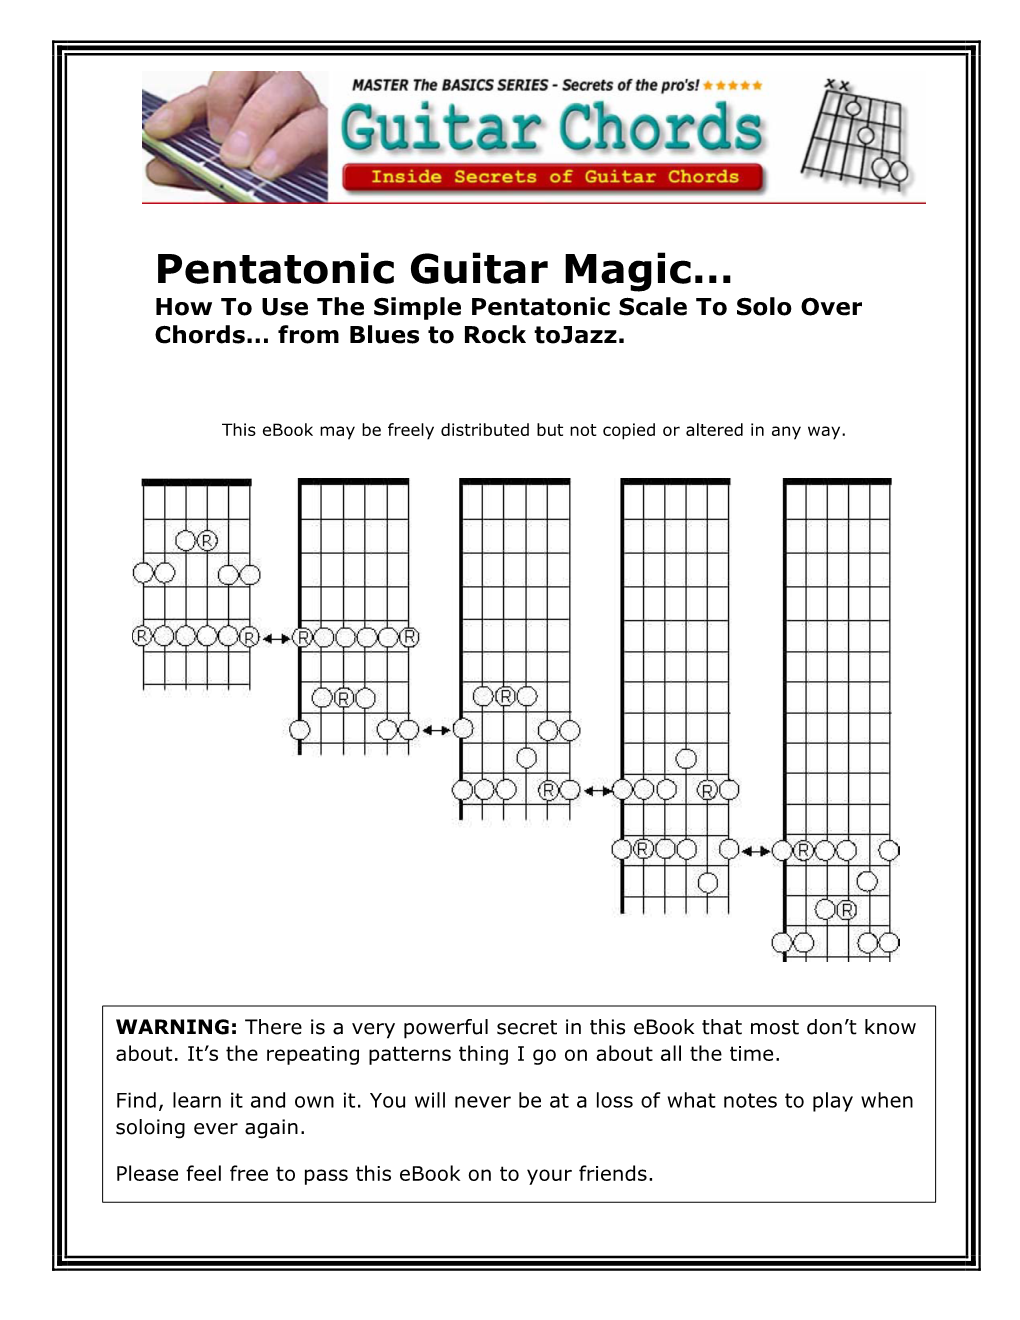 Pentatonic Guitar Magic… How to Use the Simple Pentatonic Scale to Solo Over Chords… from Blues to Rock Tojazz